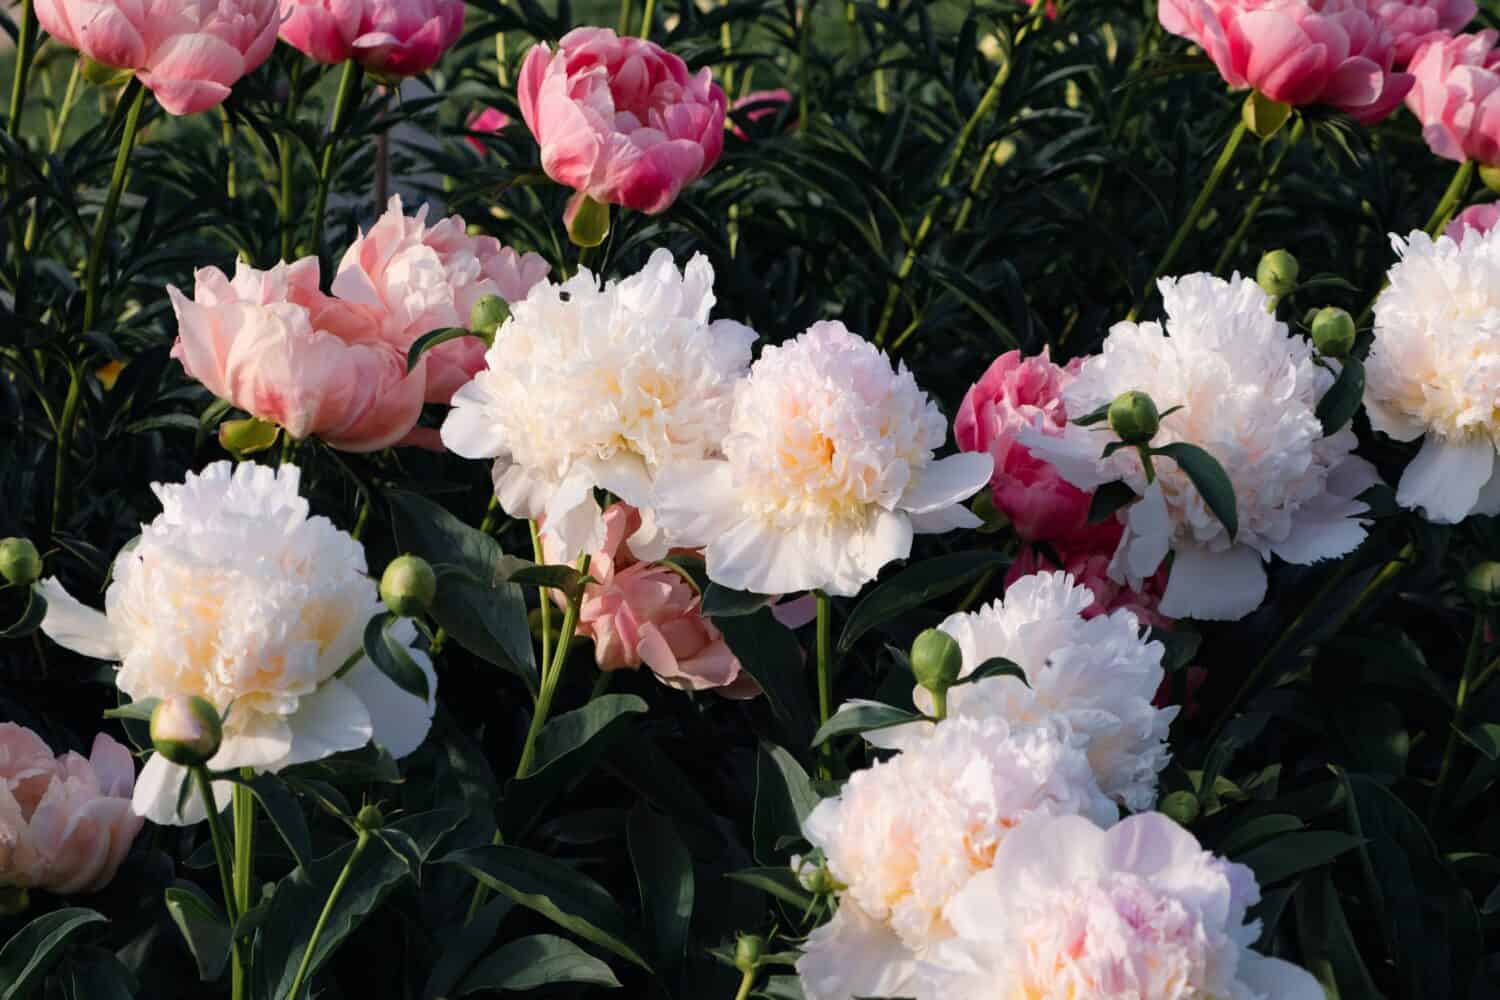 Beautiful fresh delicate pastel pink and white peony flowers in full bloom in the garden, dark green leaves, close up. Summer natural flowery background.